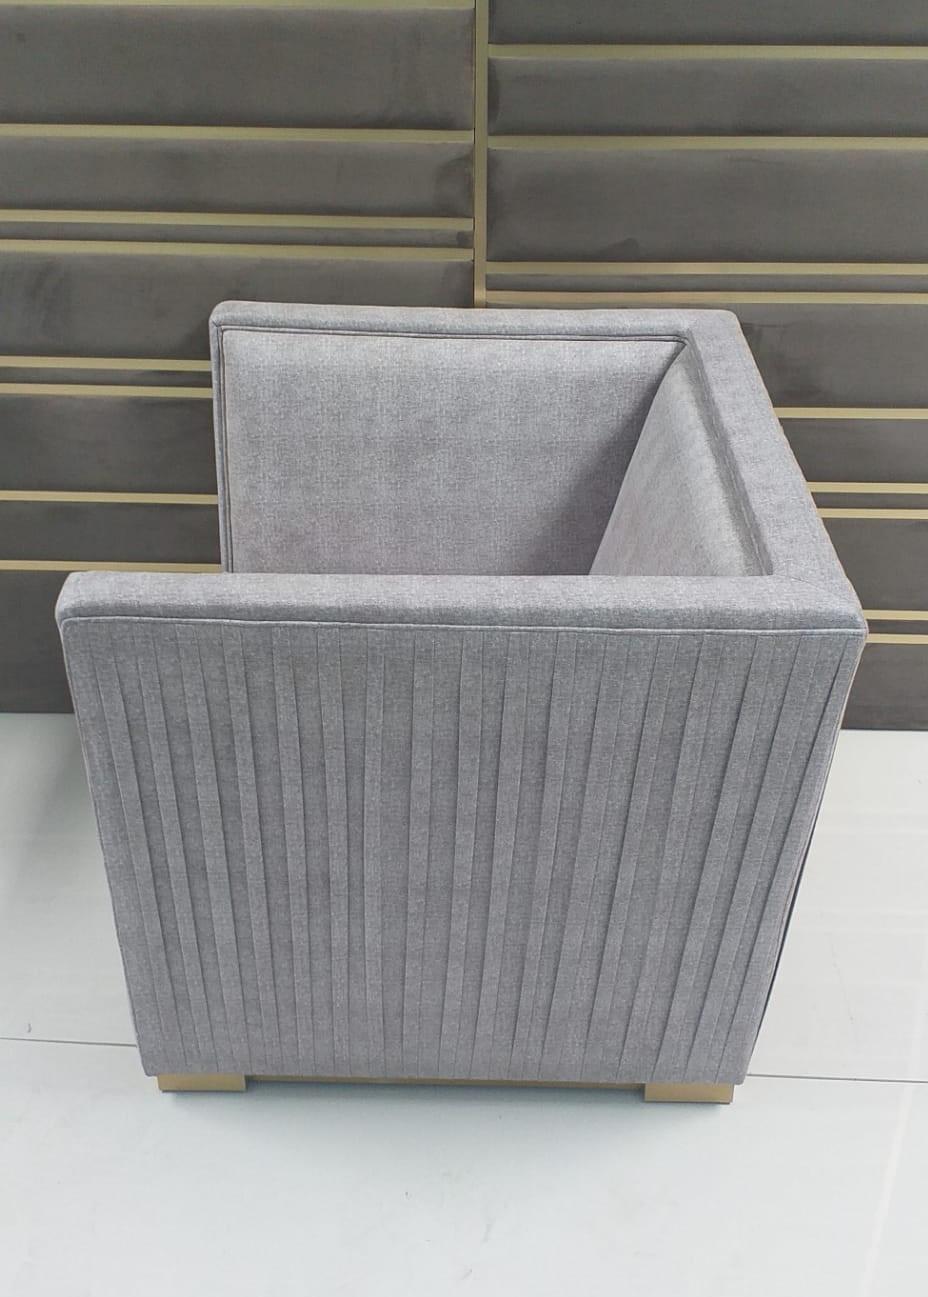 A very elegant and Classic piece full of special details such as side and back view and the brushed brass plinth. 

Upholstered with light green weekend 12.